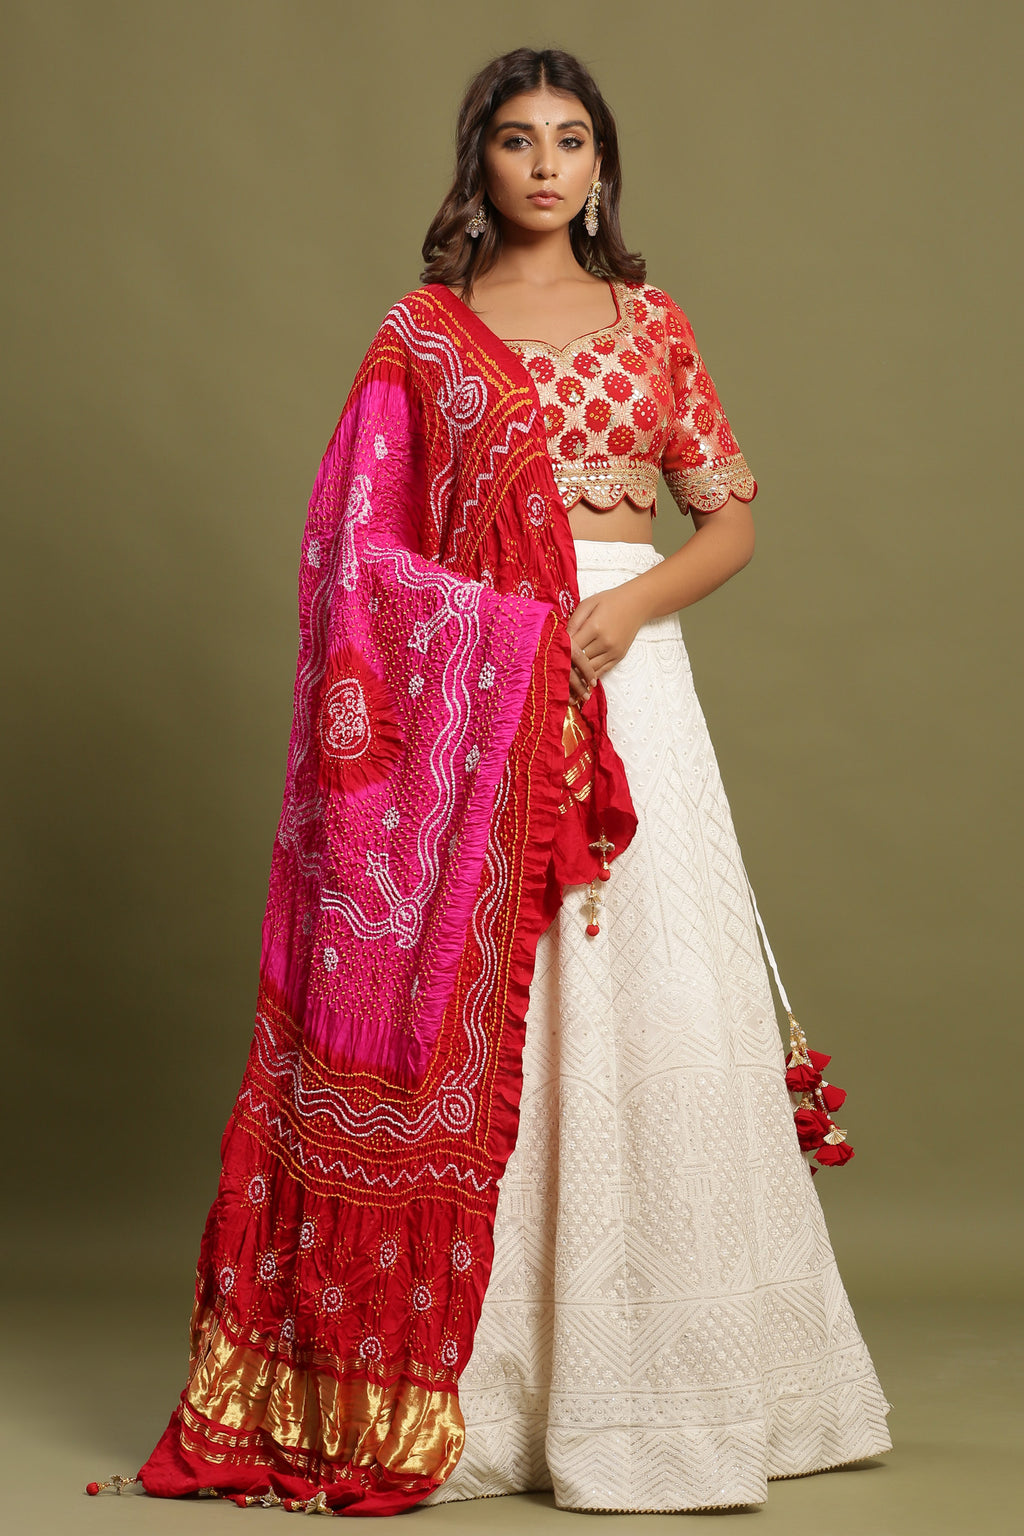 Shop White self-embroidered Zari lehenga set featuring bandhej dual print dupatta and zari & gota patti embroidered red blouse. The lehenga also has a long tassel attached to tie the knot. Pair it with beautiful jewelry to enhance your look. Shop online from Pure Elegance.